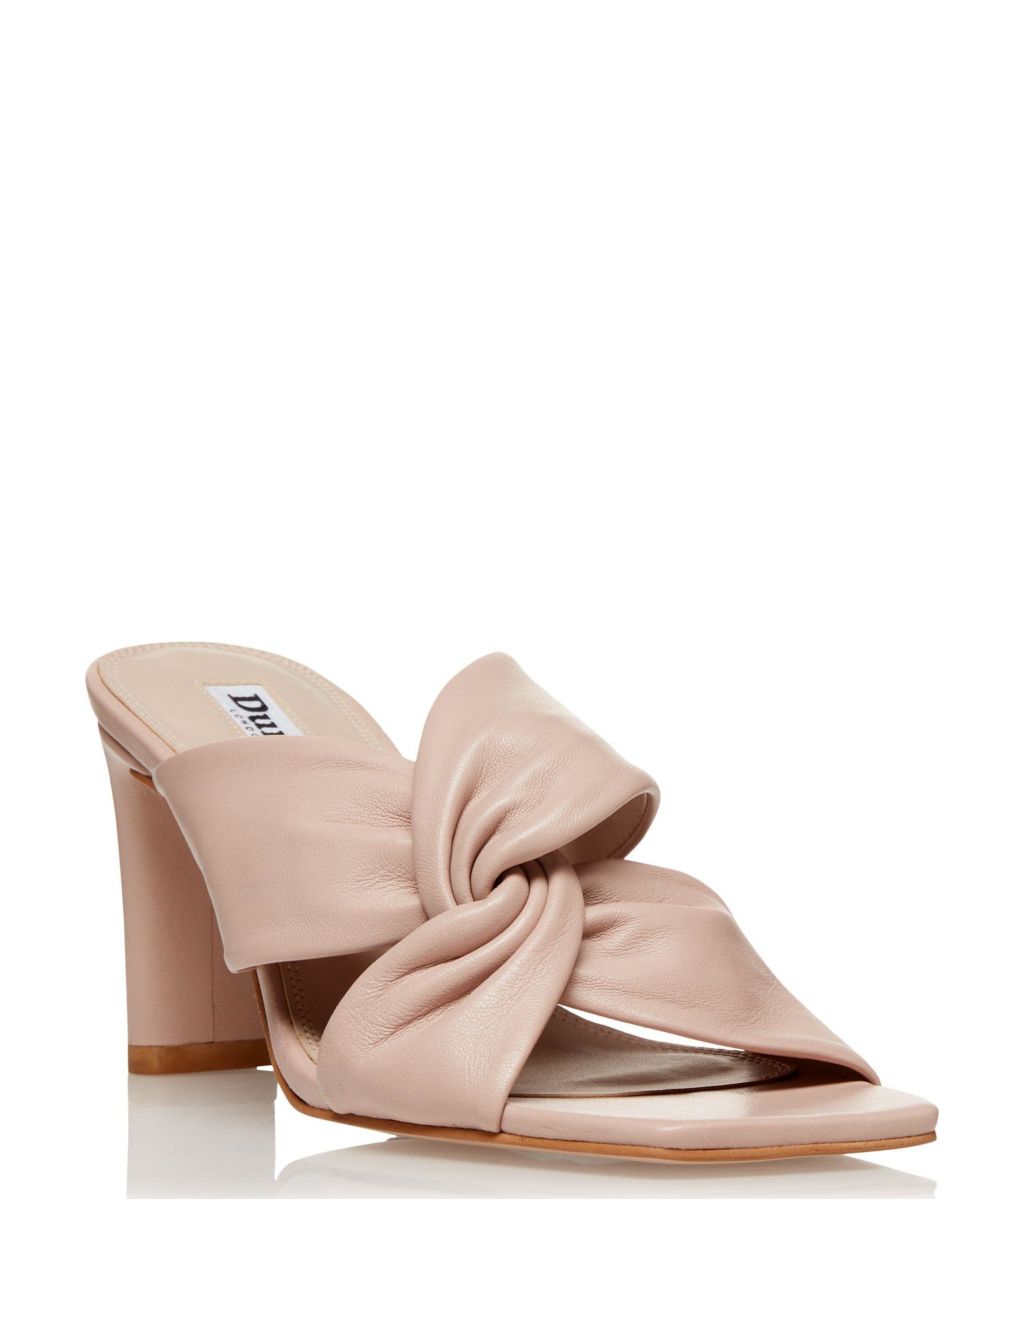 Leather Knot Block Heel Mules image 2